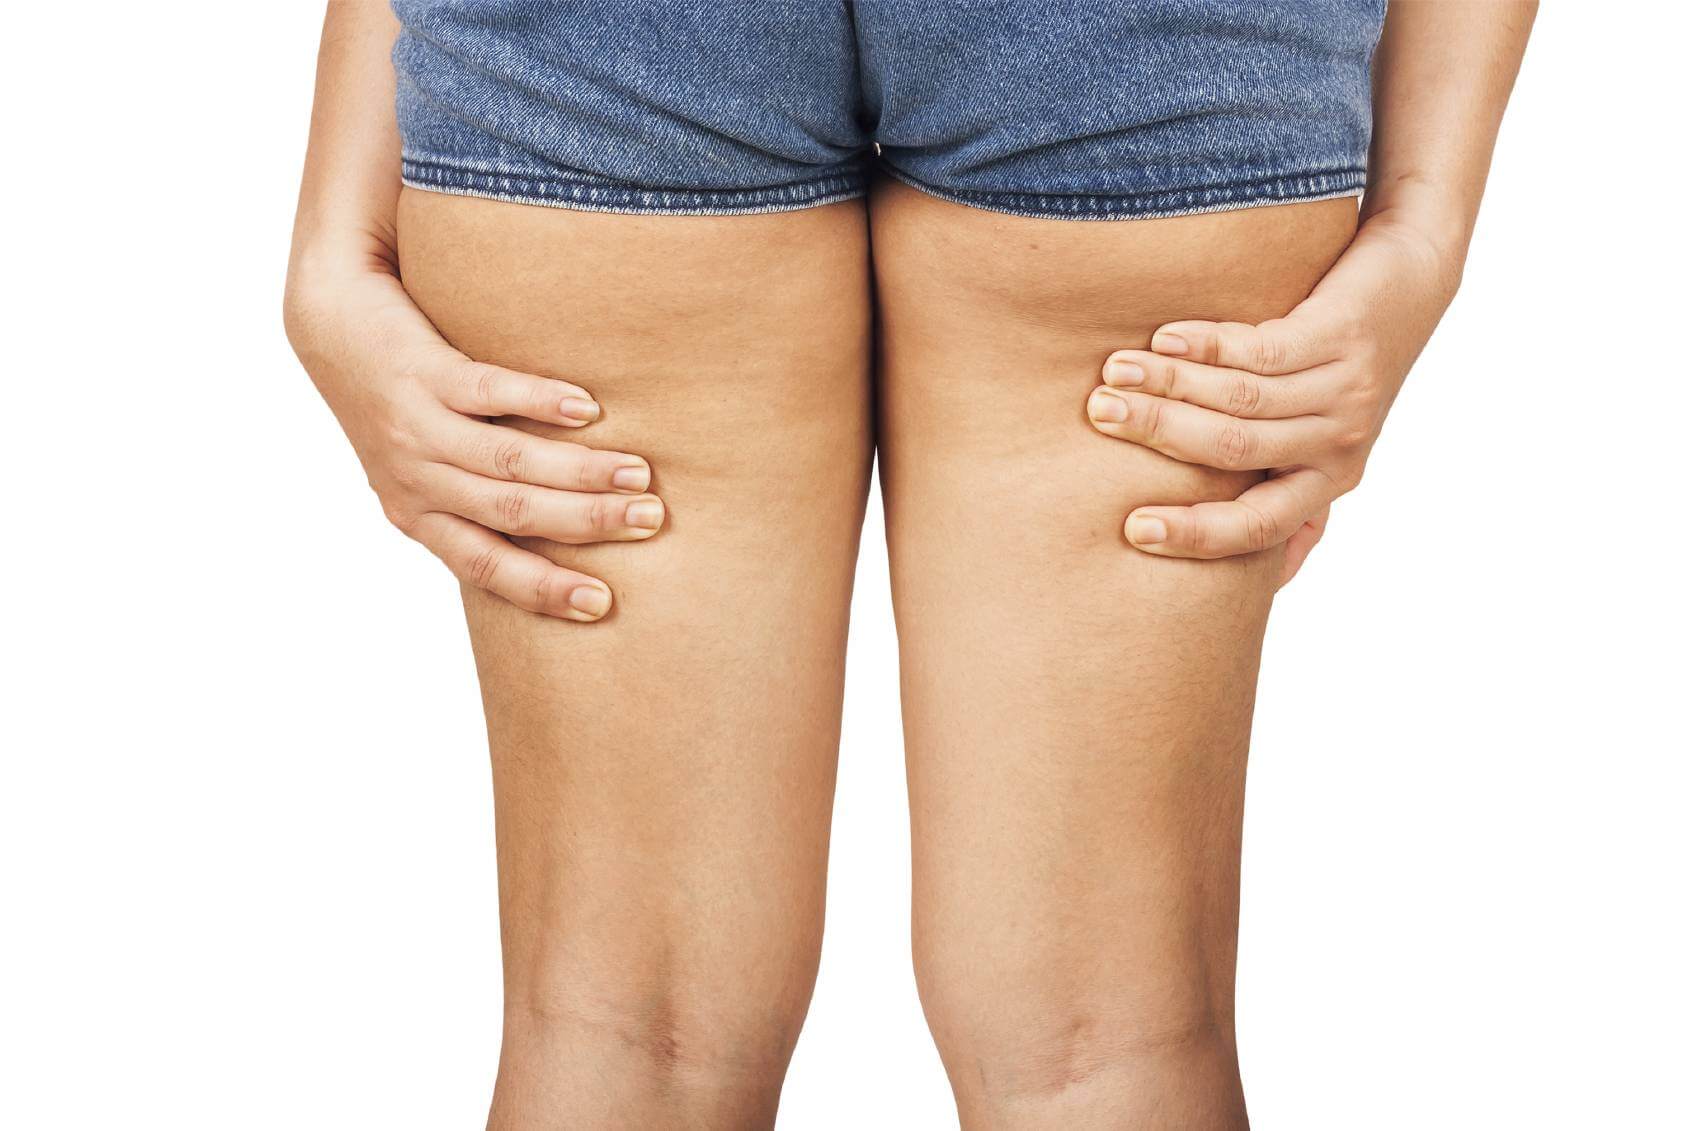 Is It Possible To Get Rid Of Cellulite Naturally